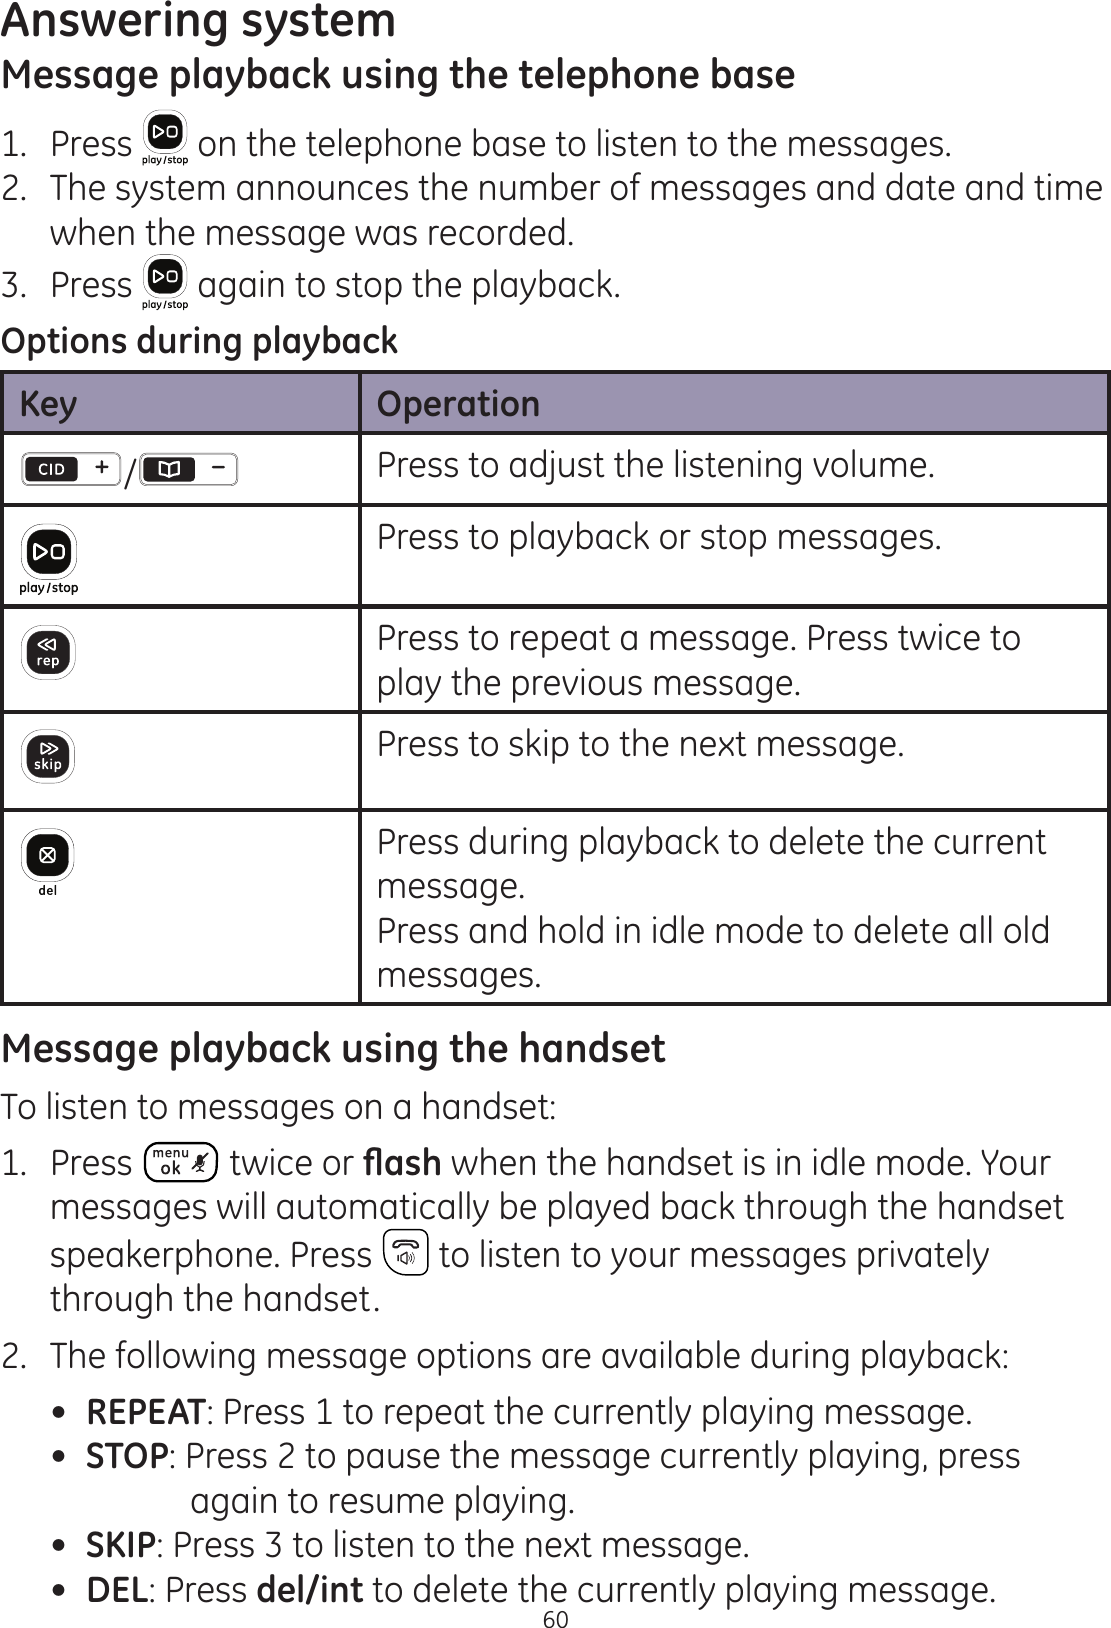 Answering system60Message playback using the telephone base1.  Press  on the telephone base to listen to the messages. 2.  The system announces the number of messages and date and time when the message was recorded. 3.  Press   again to stop the playback. Options during playbackKey Operation/Press to adjust the listening volume. Press to playback or stop messages.Press to repeat a message. Press twice to play the previous message.Press to skip to the next message.Press during playback to delete the current message.Press and hold in idle mode to delete all old messages. Message playback using the handsetTo listen to messages on a handset:1.  Press   twice or ÀDVK when the handset is in idle mode. Your messages will automatically be played back through the handset speakerphone. Press   to listen to your messages privately through the handset. 2.  The following message options are available during playback: REPEAT: Press 1 to repeat the currently playing message. STOP: Press 2 to pause the message currently playing, press     again to resume playing.  SKIP: Press 3 to listen to the next message. DEL: Press del/int to delete the currently playing message. 